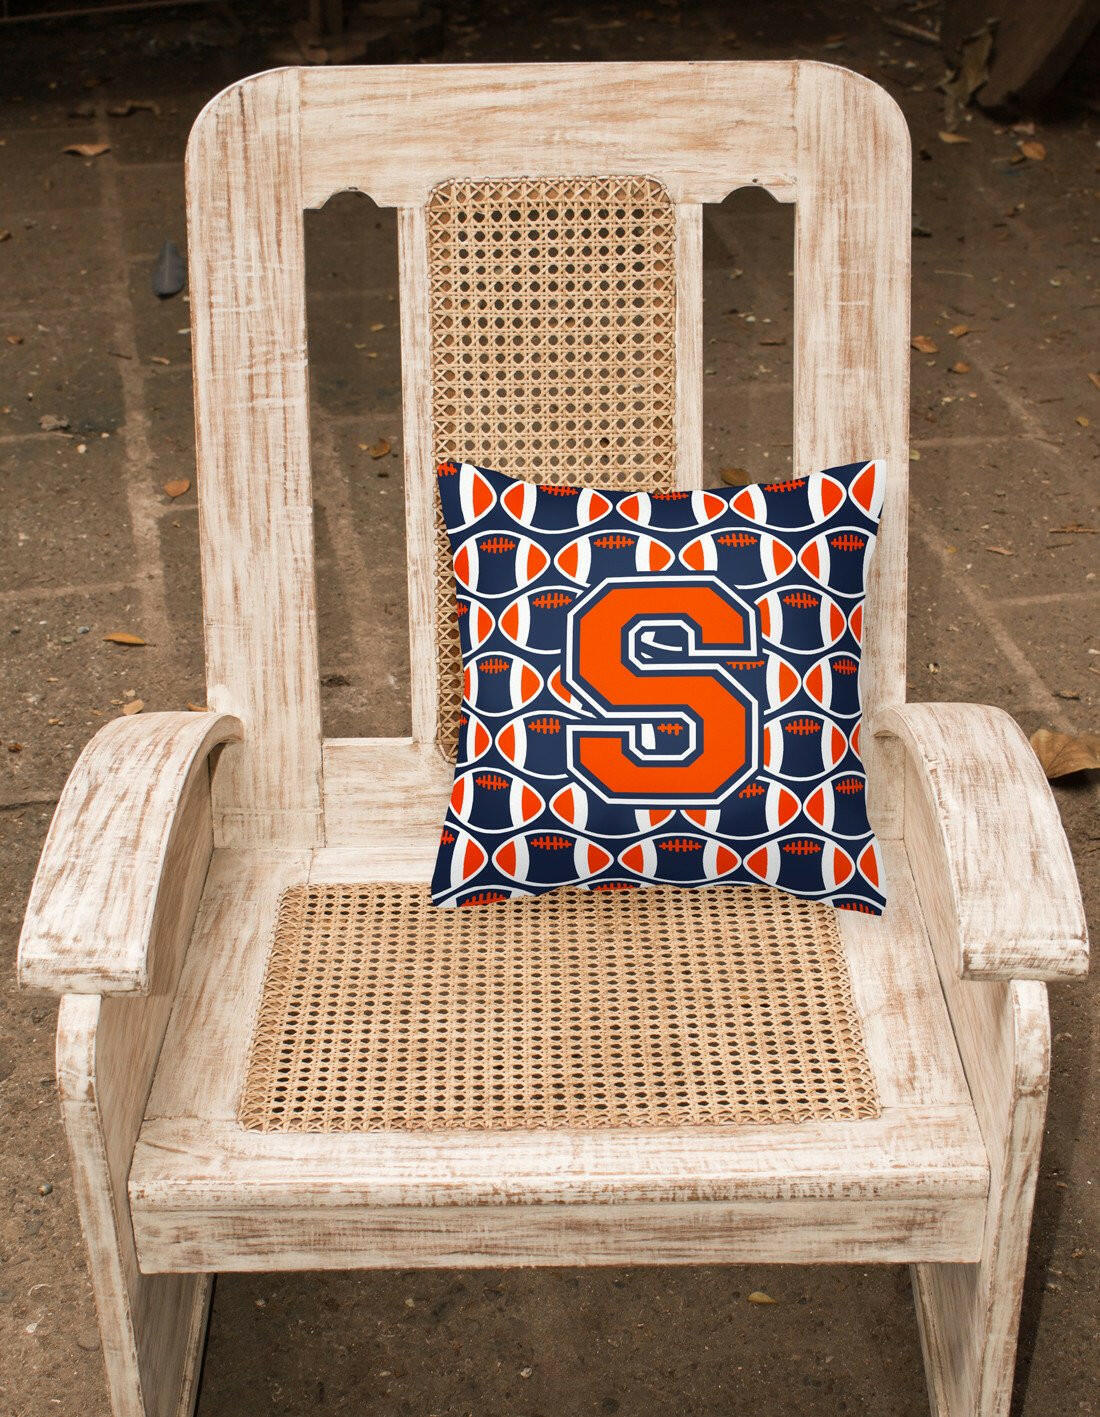 Letter S Football Orange, Blue and white Fabric Decorative Pillow CJ1066-SPW1414 by Caroline's Treasures